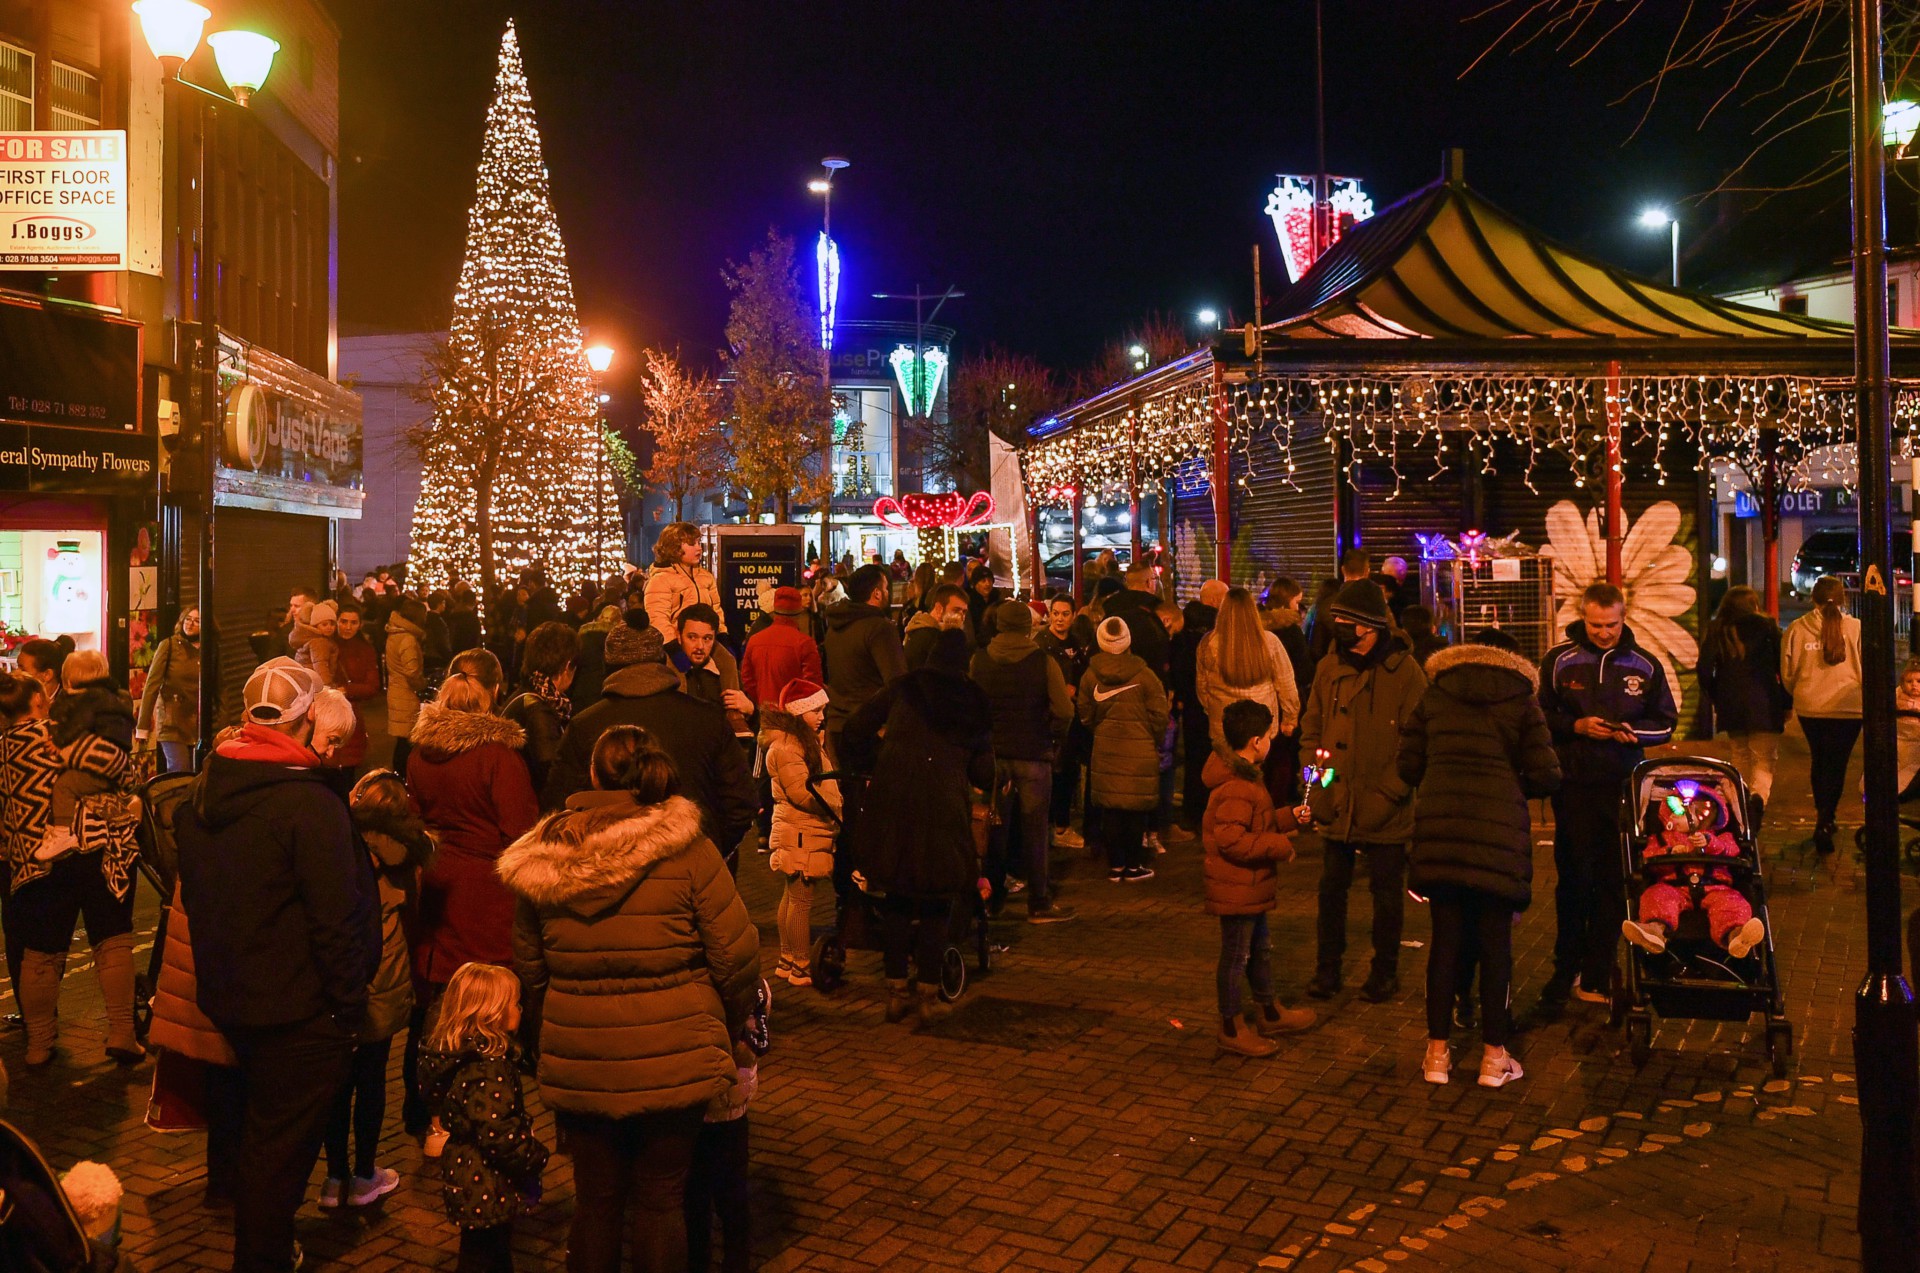 Midnight switch-off planned for Strabane Christmas illuminations